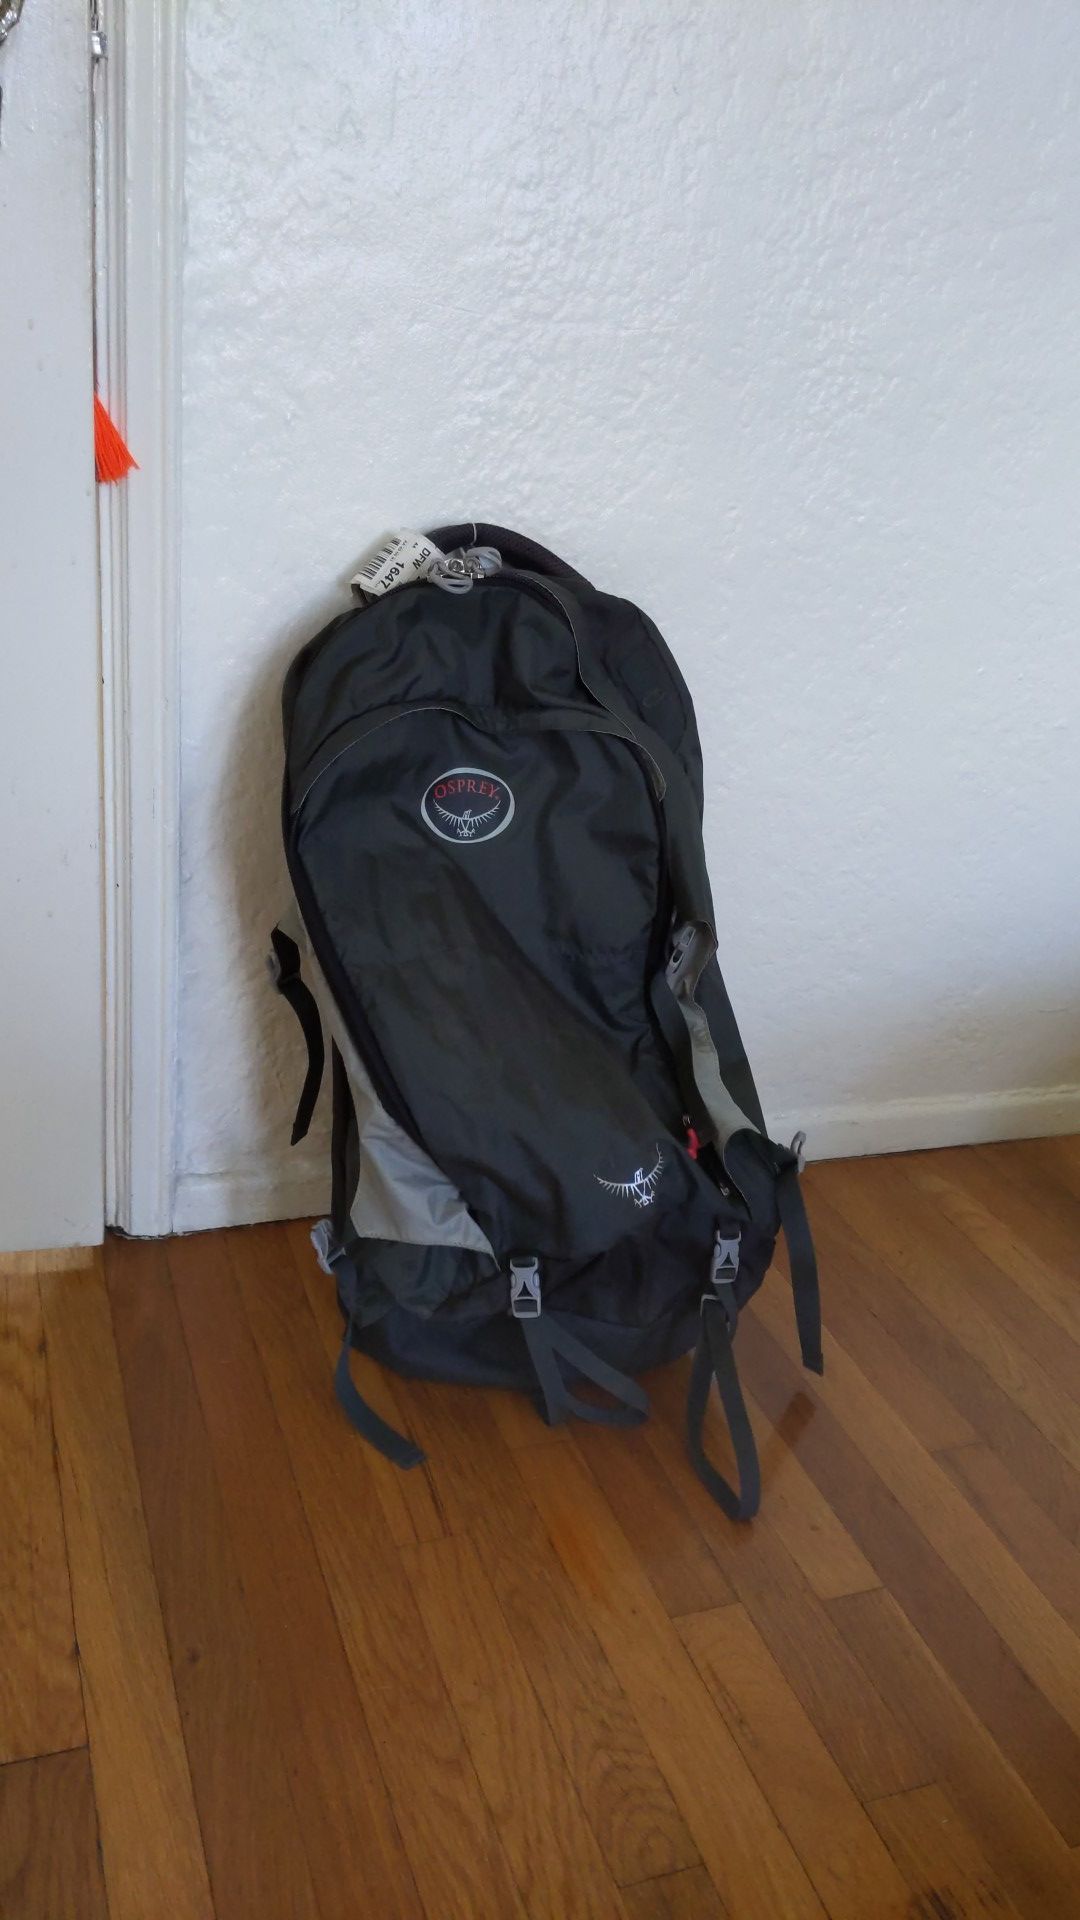 OSPREY 55 FARPOINT BACKPACK LUGGAGE